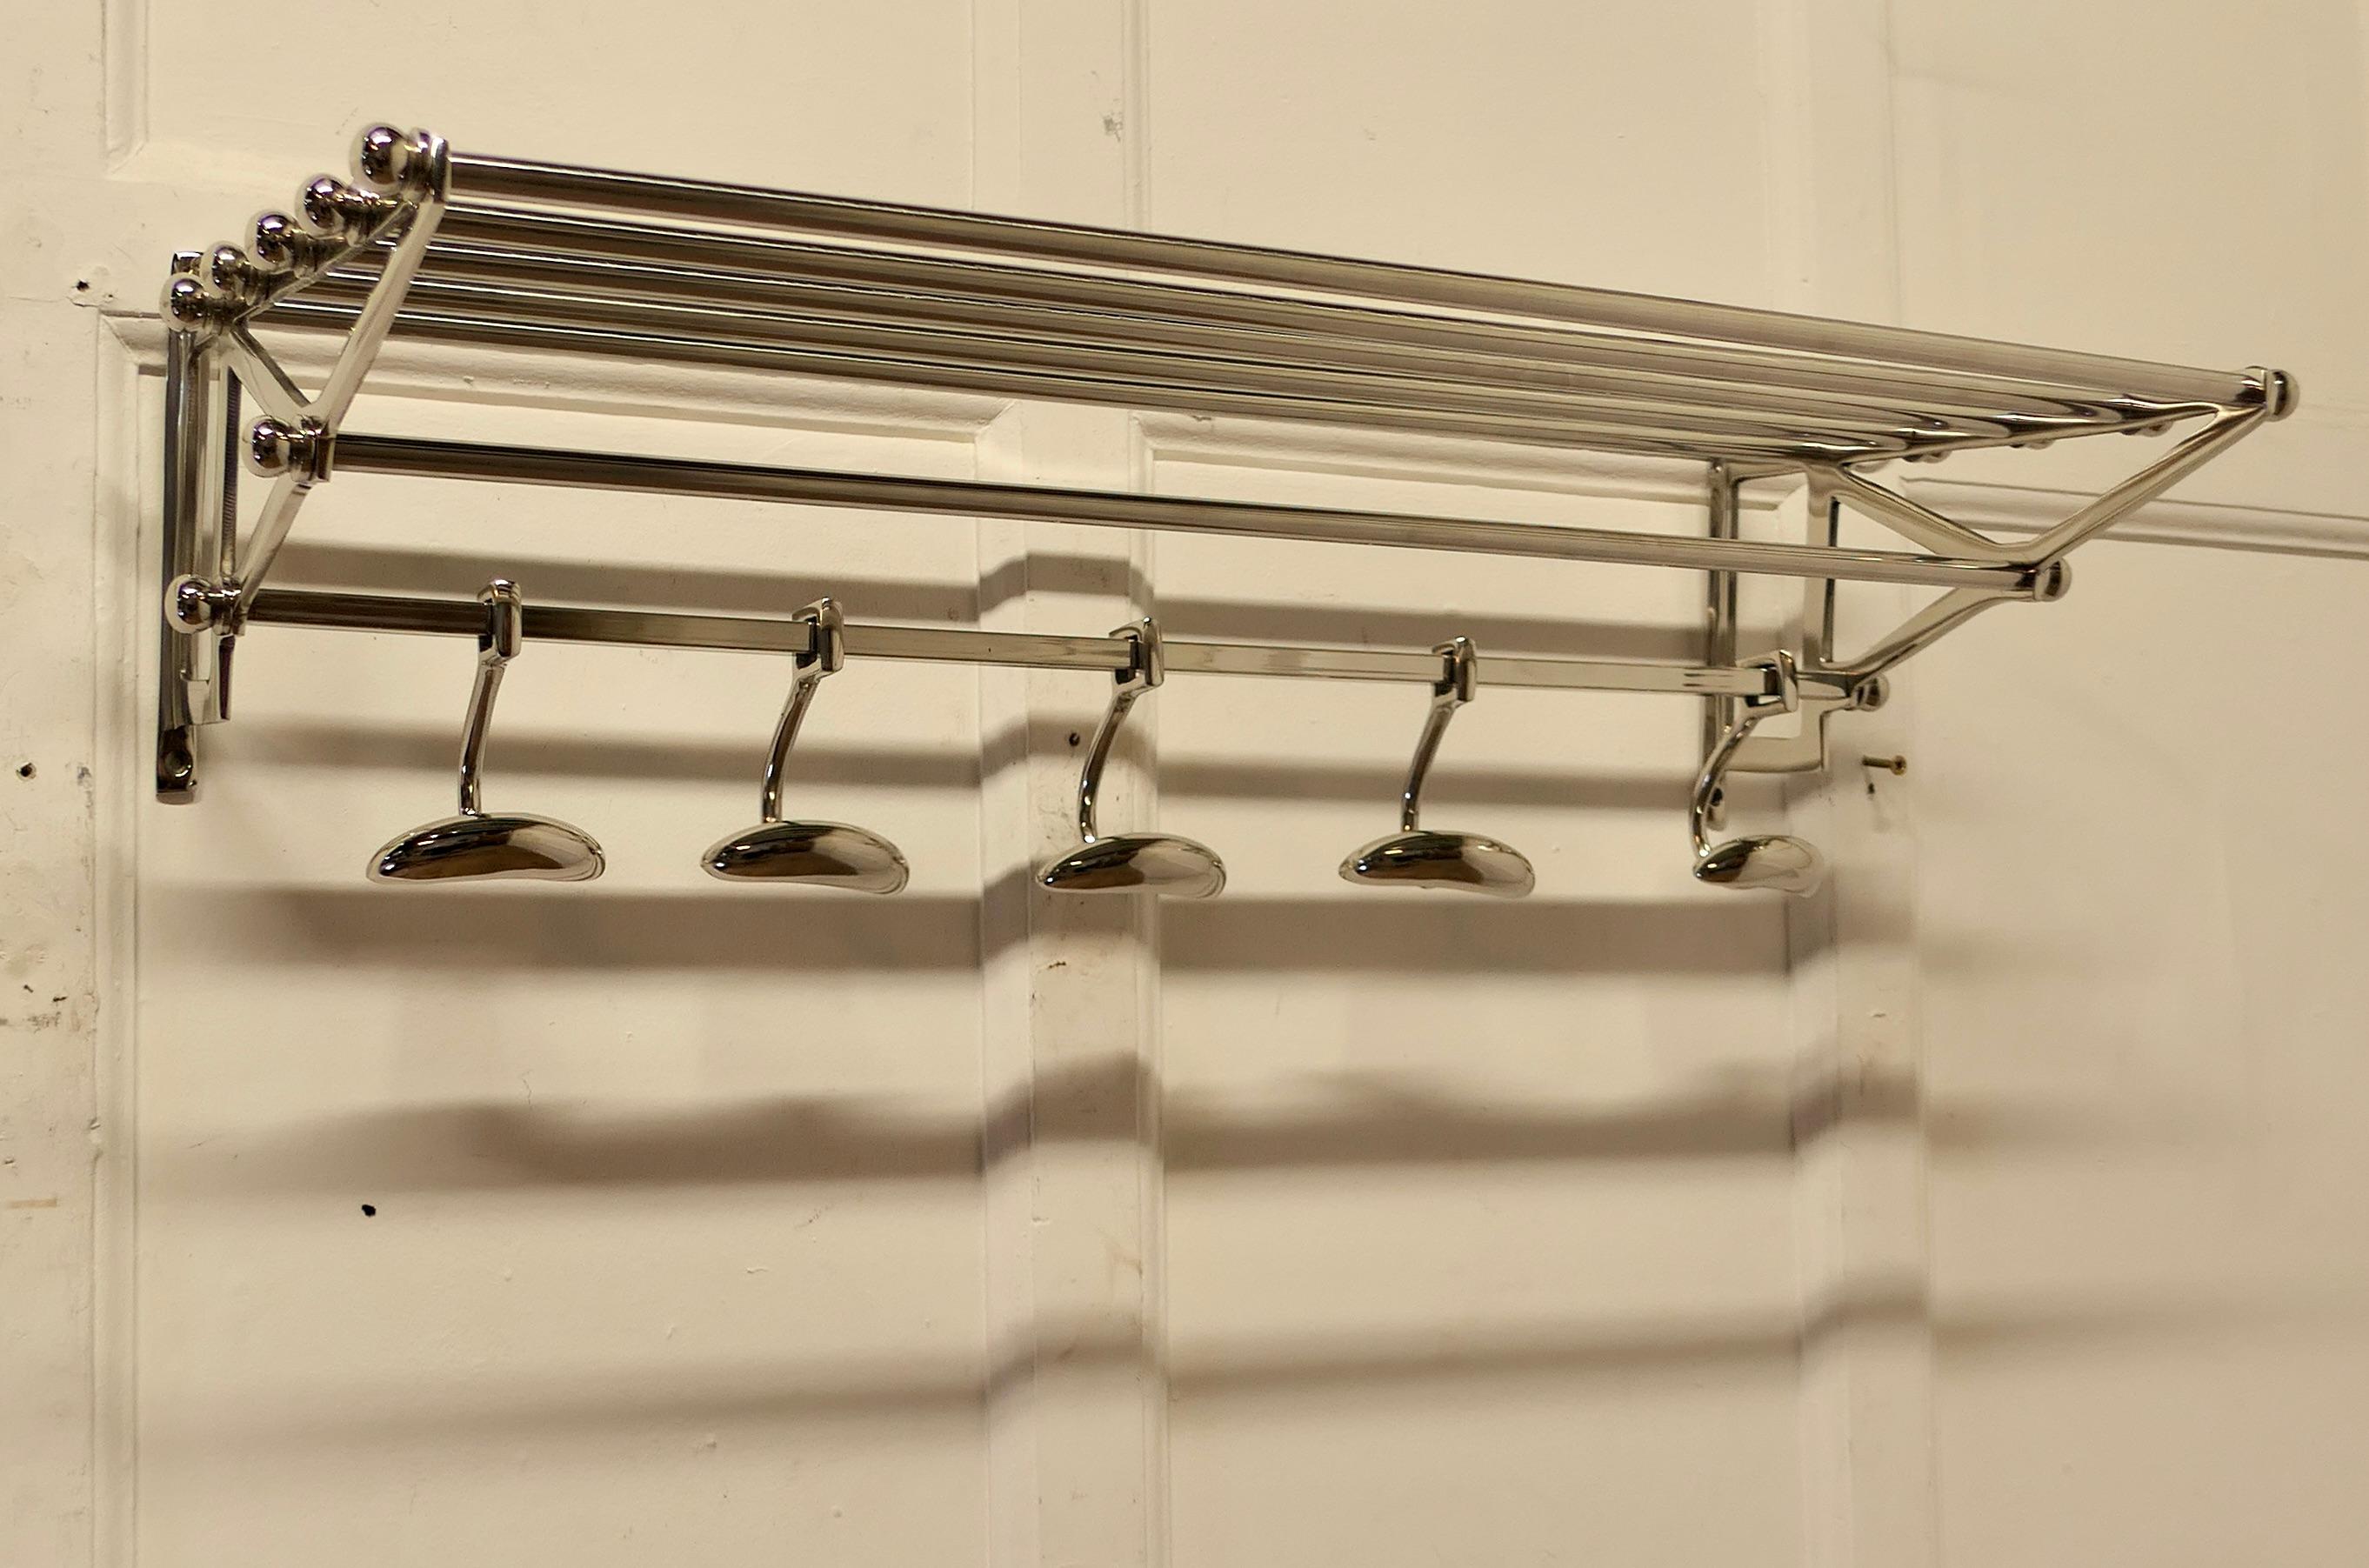 French Art Deco Style Hat and Coat Rack, Pullman Railway Train Style

 This Very Stylish Art Deco style hat and coat rack has five sliding hooks and an upper railed shelf 
Racks just like these were used on French railway trains just like the ones